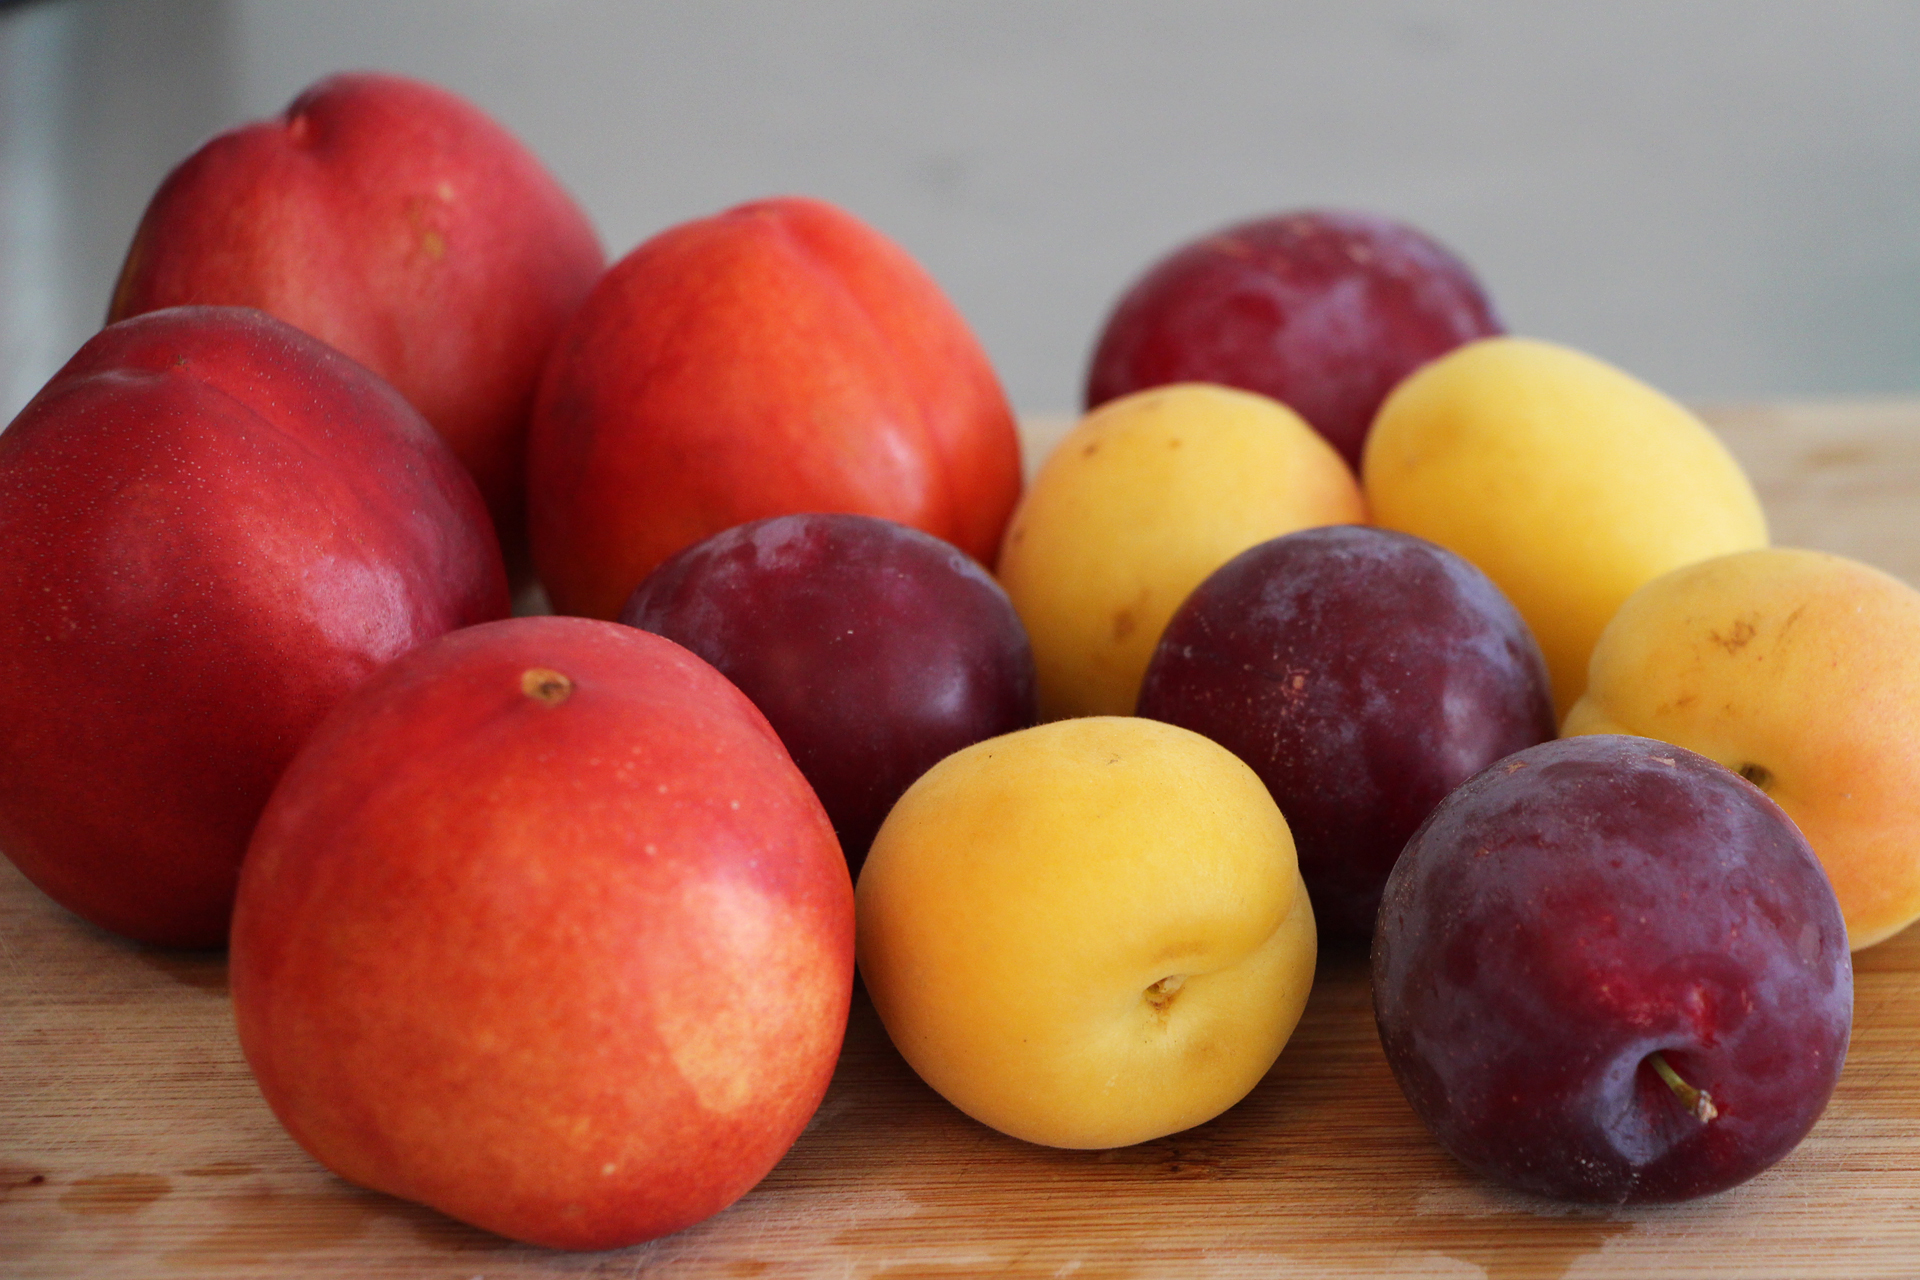 Nectarines, plums and apricots for the Summer Stone Fruit Salad